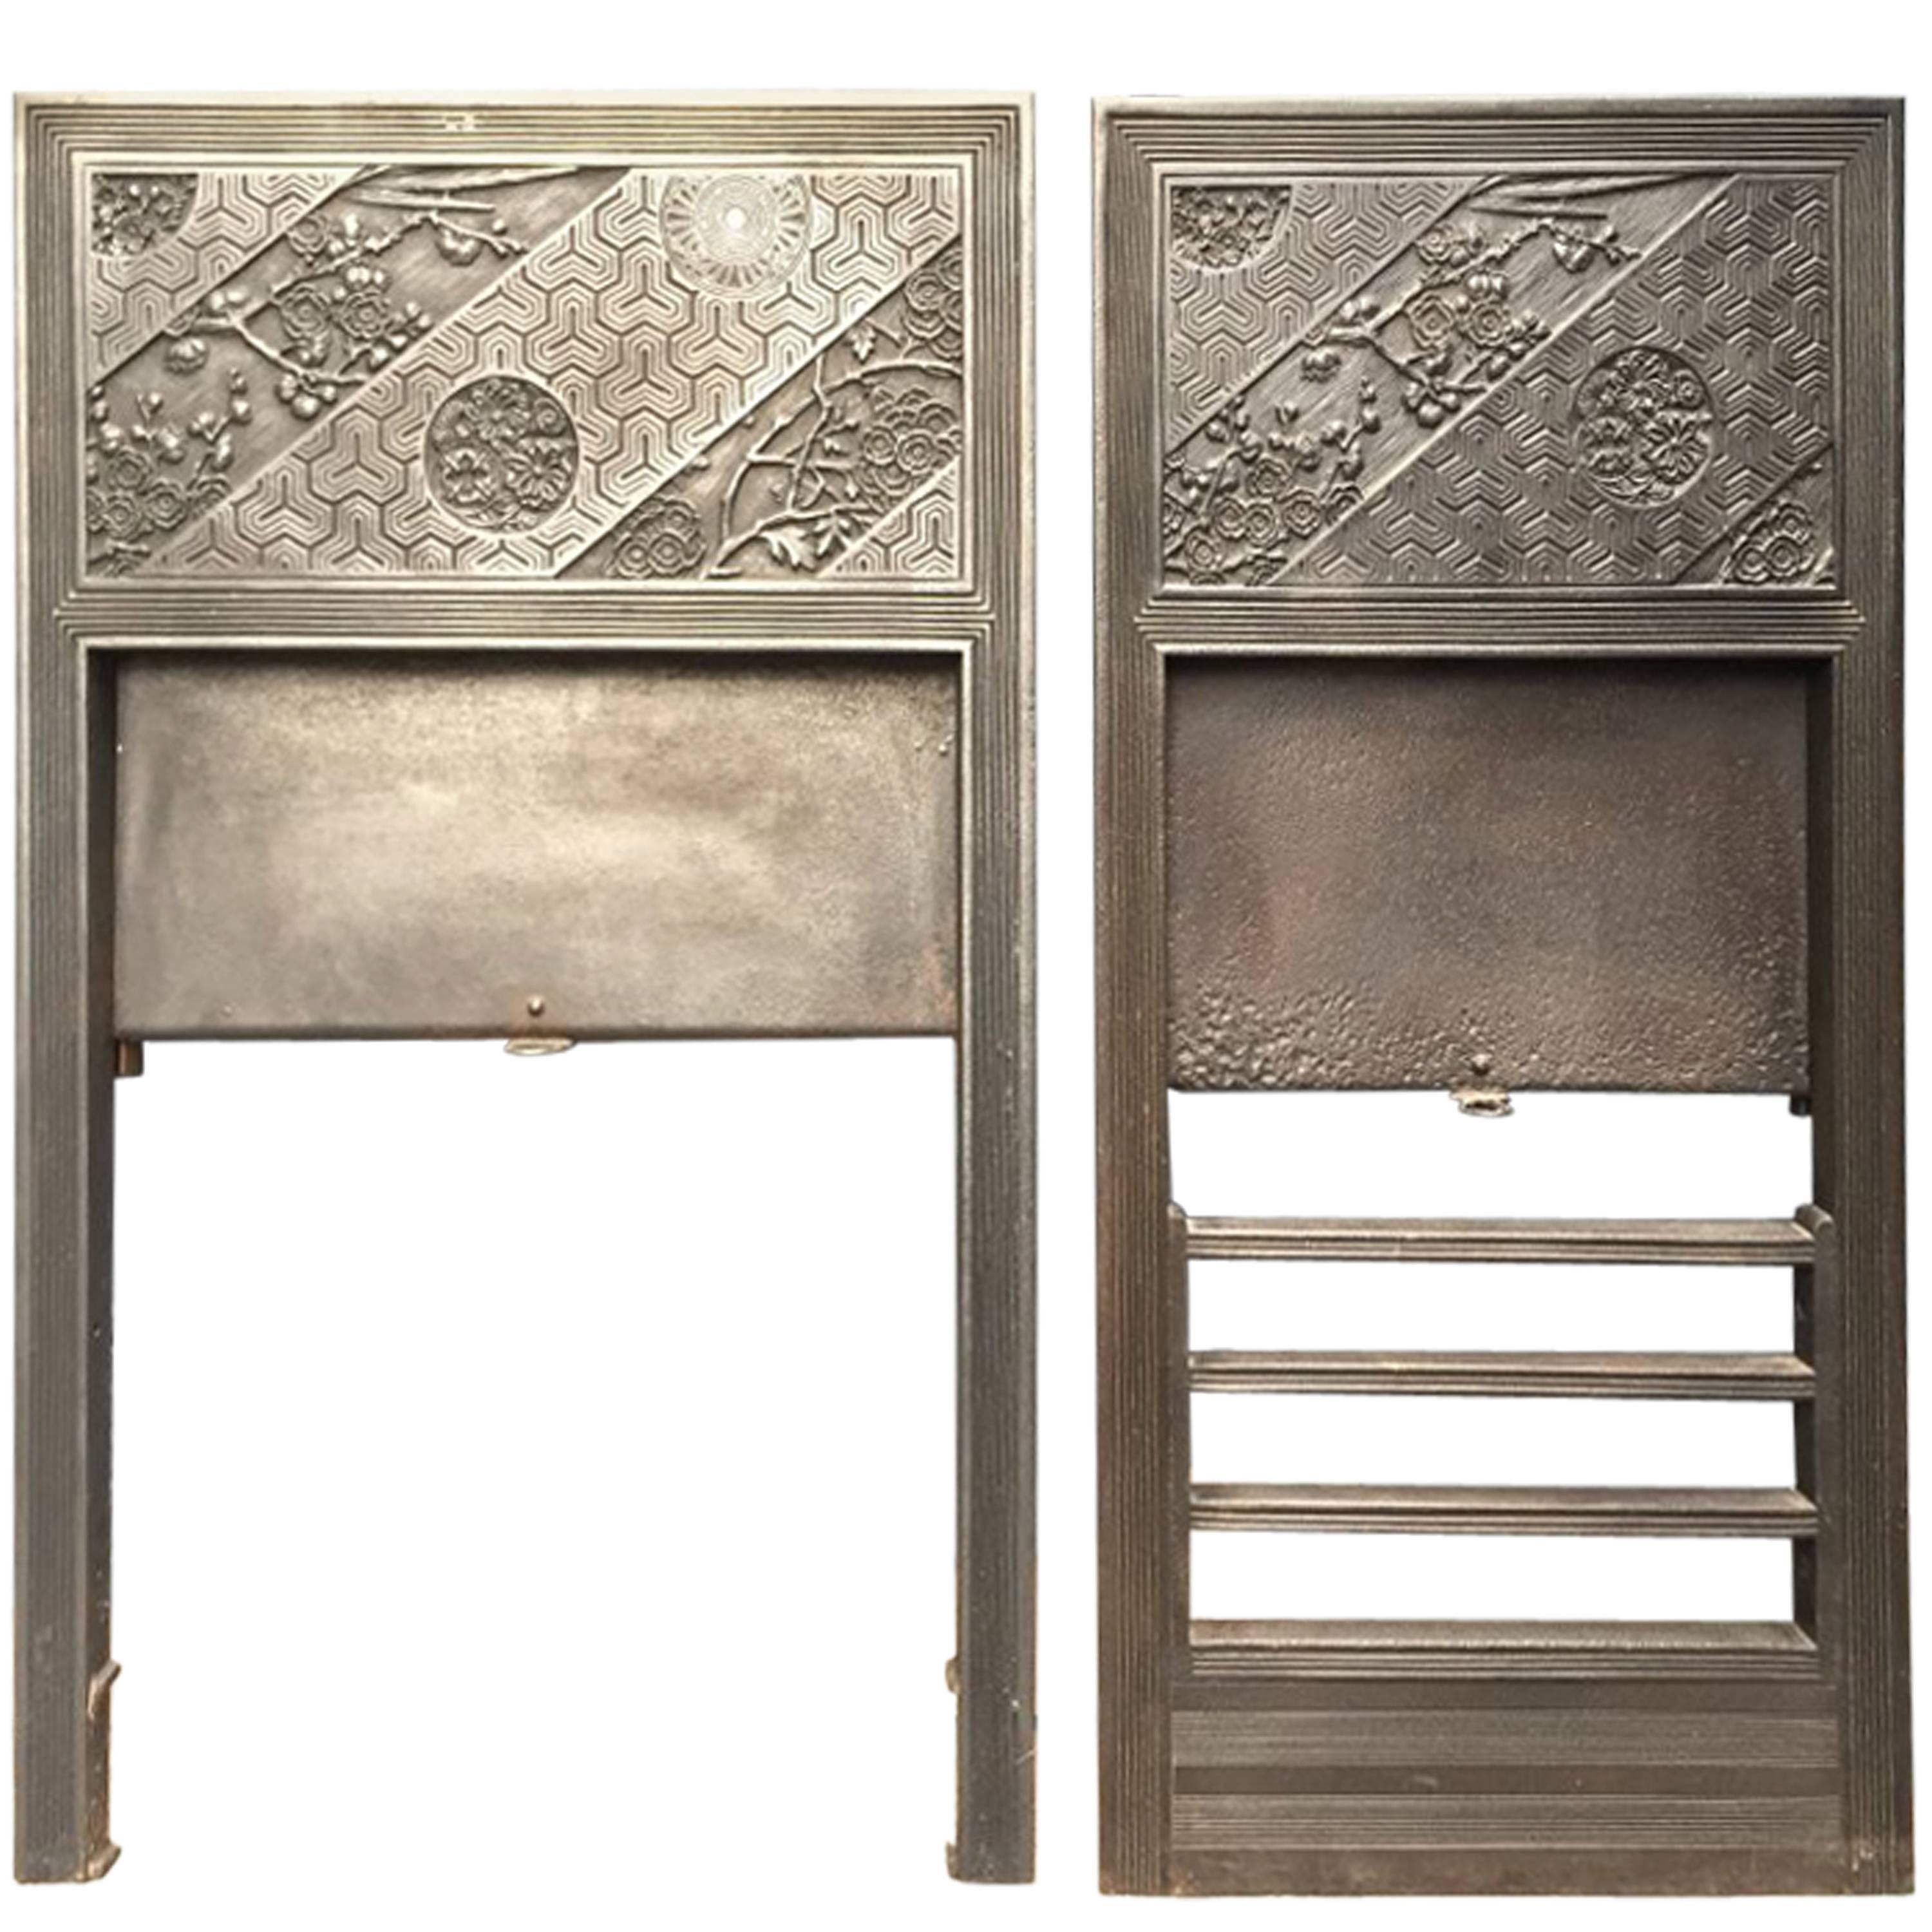 Pair of Anglo-Japanese Cast Iron Fire Inserts by T Jeckyll